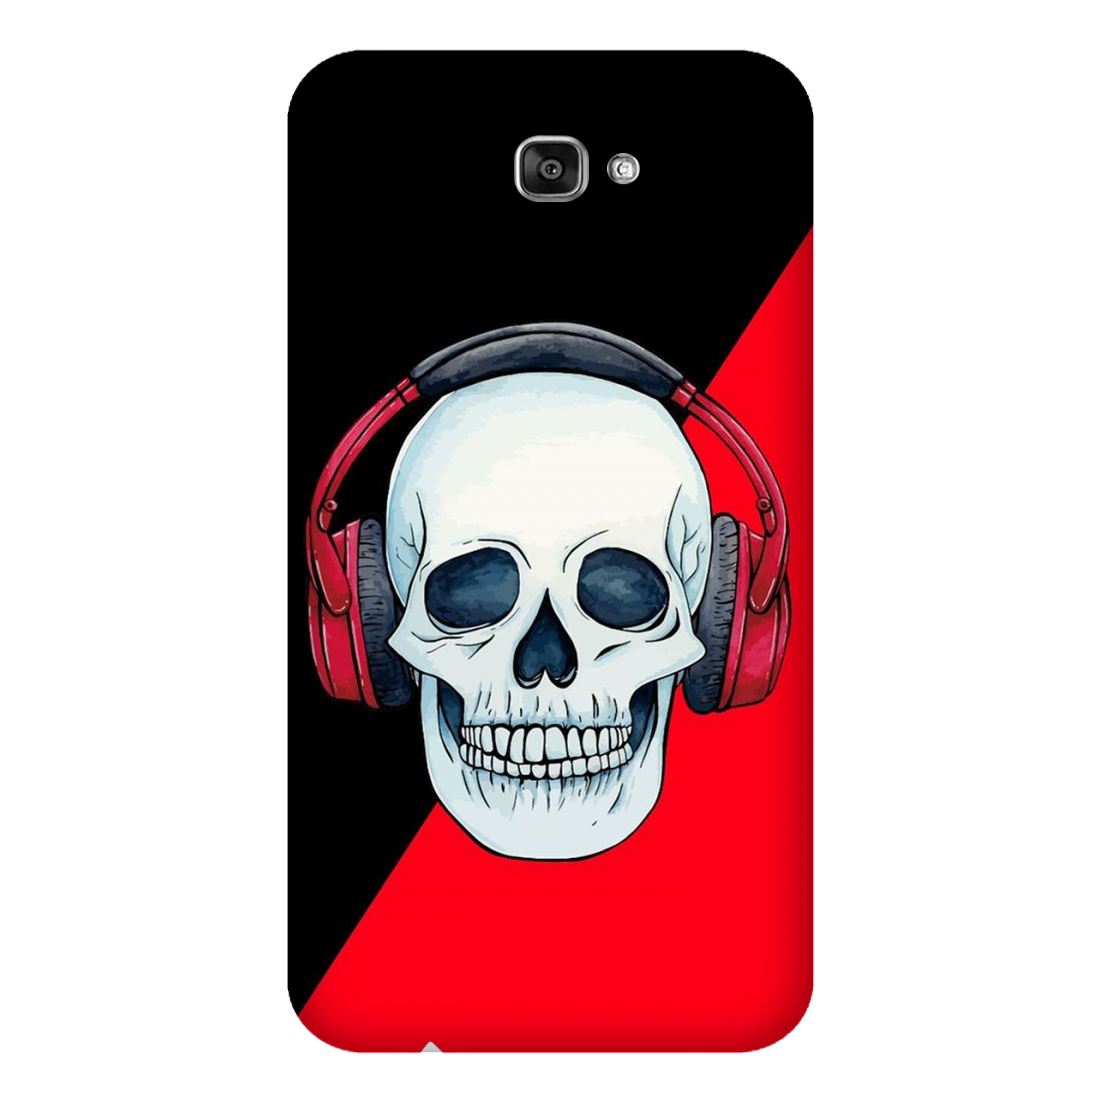 Red Headphones on Blurred Face Case Samsung Galaxy J7 Prime